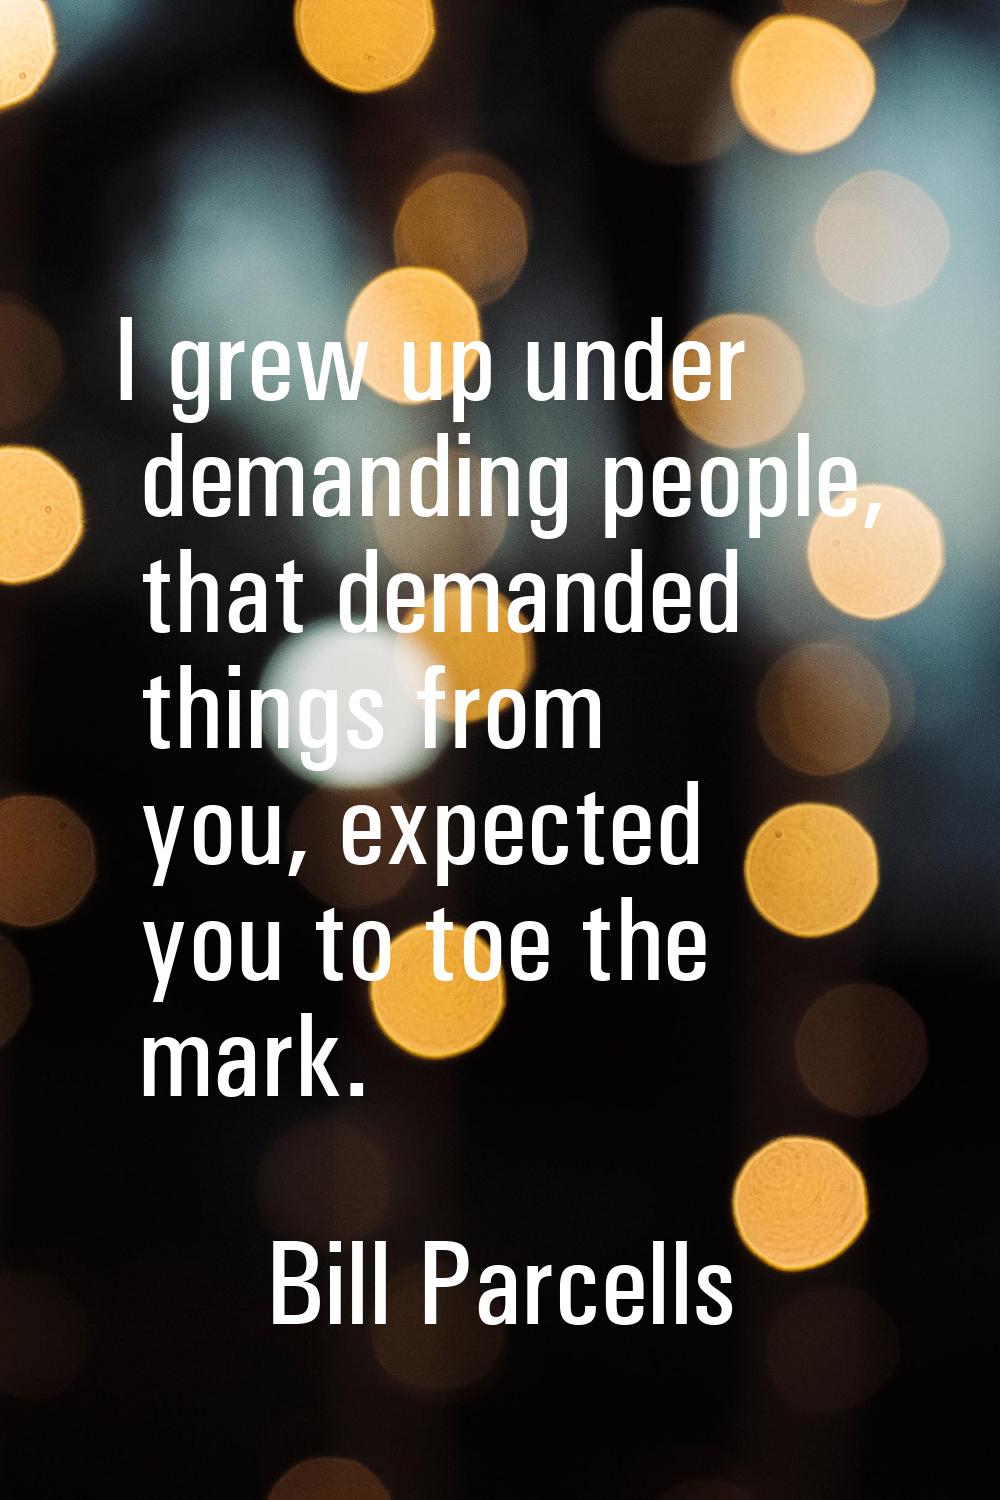 I grew up under demanding people, that demanded things from you, expected you to toe the mark.